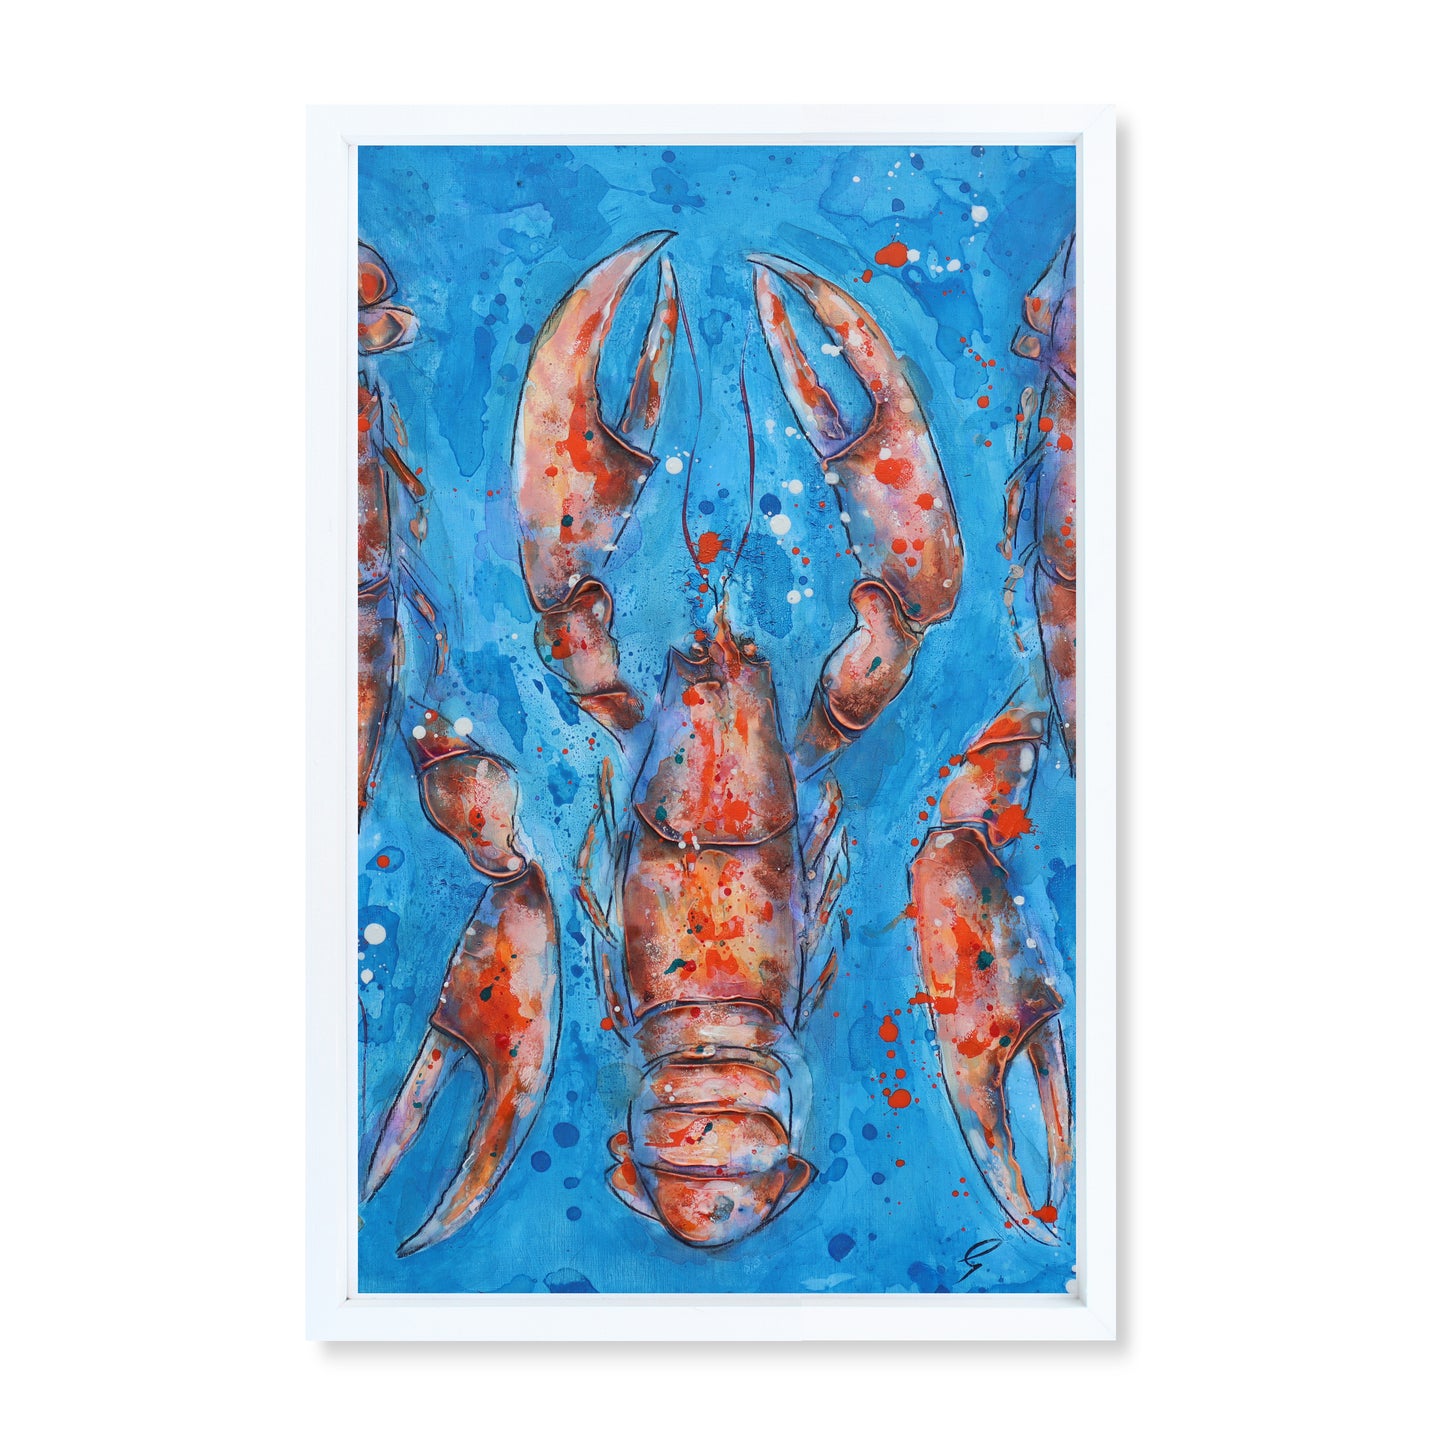 Rocked Lobster by Giles Ward